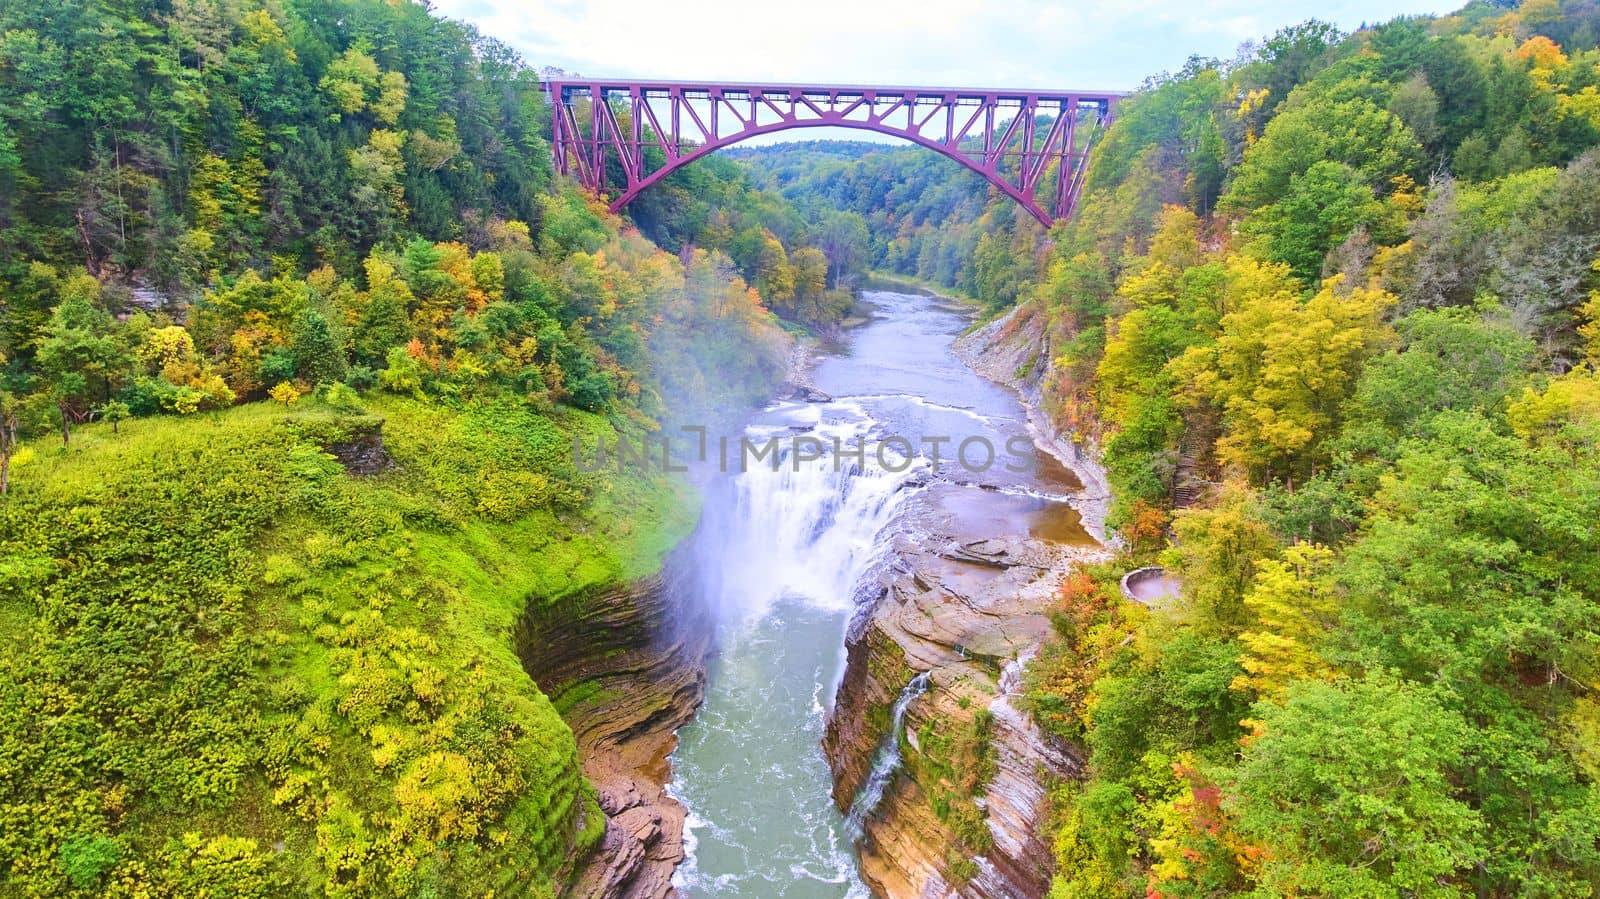 Image of Drone over amazing raging waterfall carving into cliffs with train track bridge above